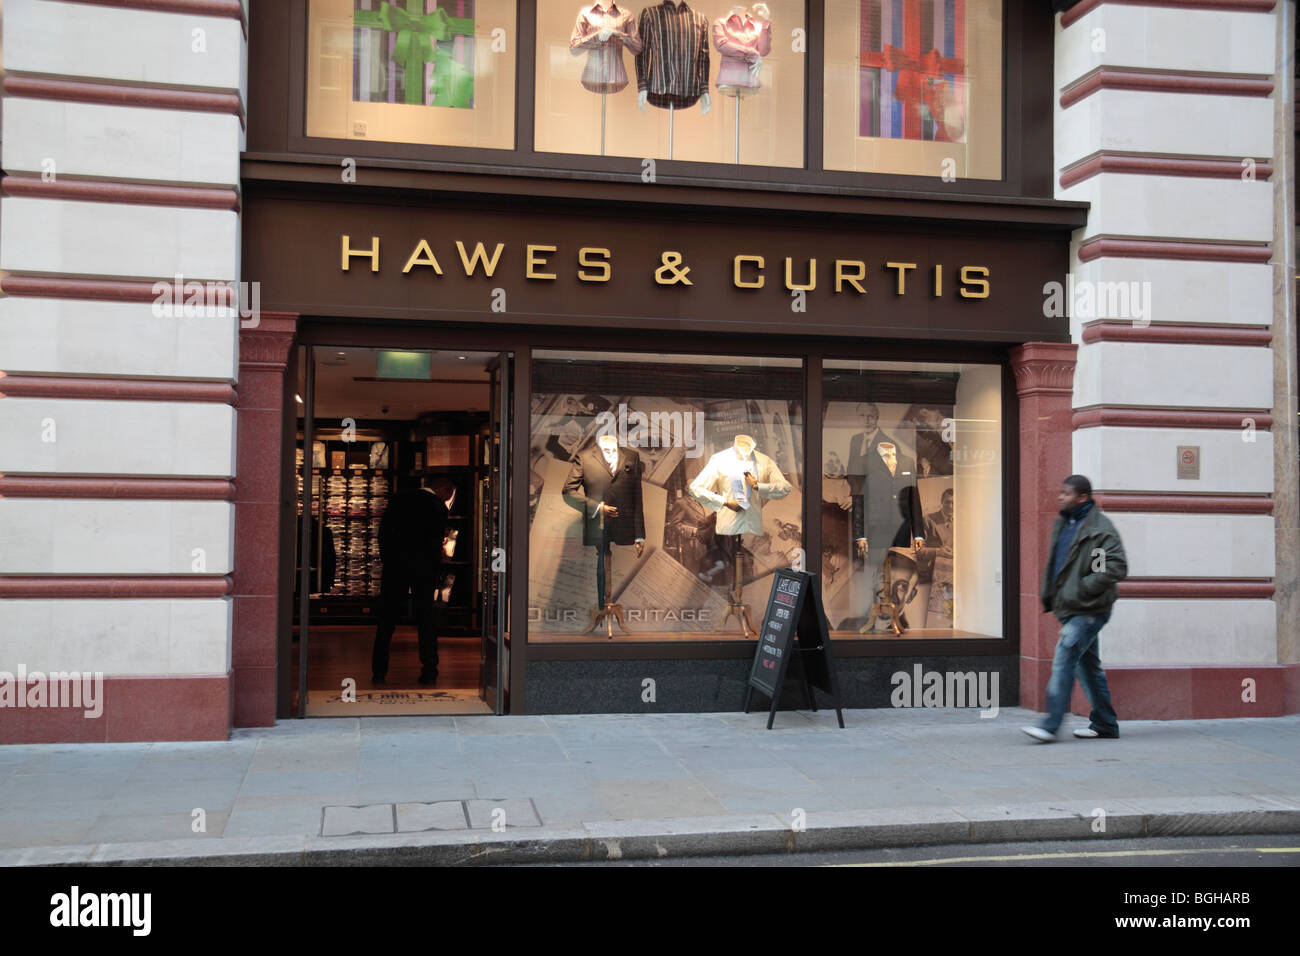 The shop front and entrance to the Hawes & Curtis men's clothing shop on Jermyn Street,  London, UK. Nov 2009 Stock Photo